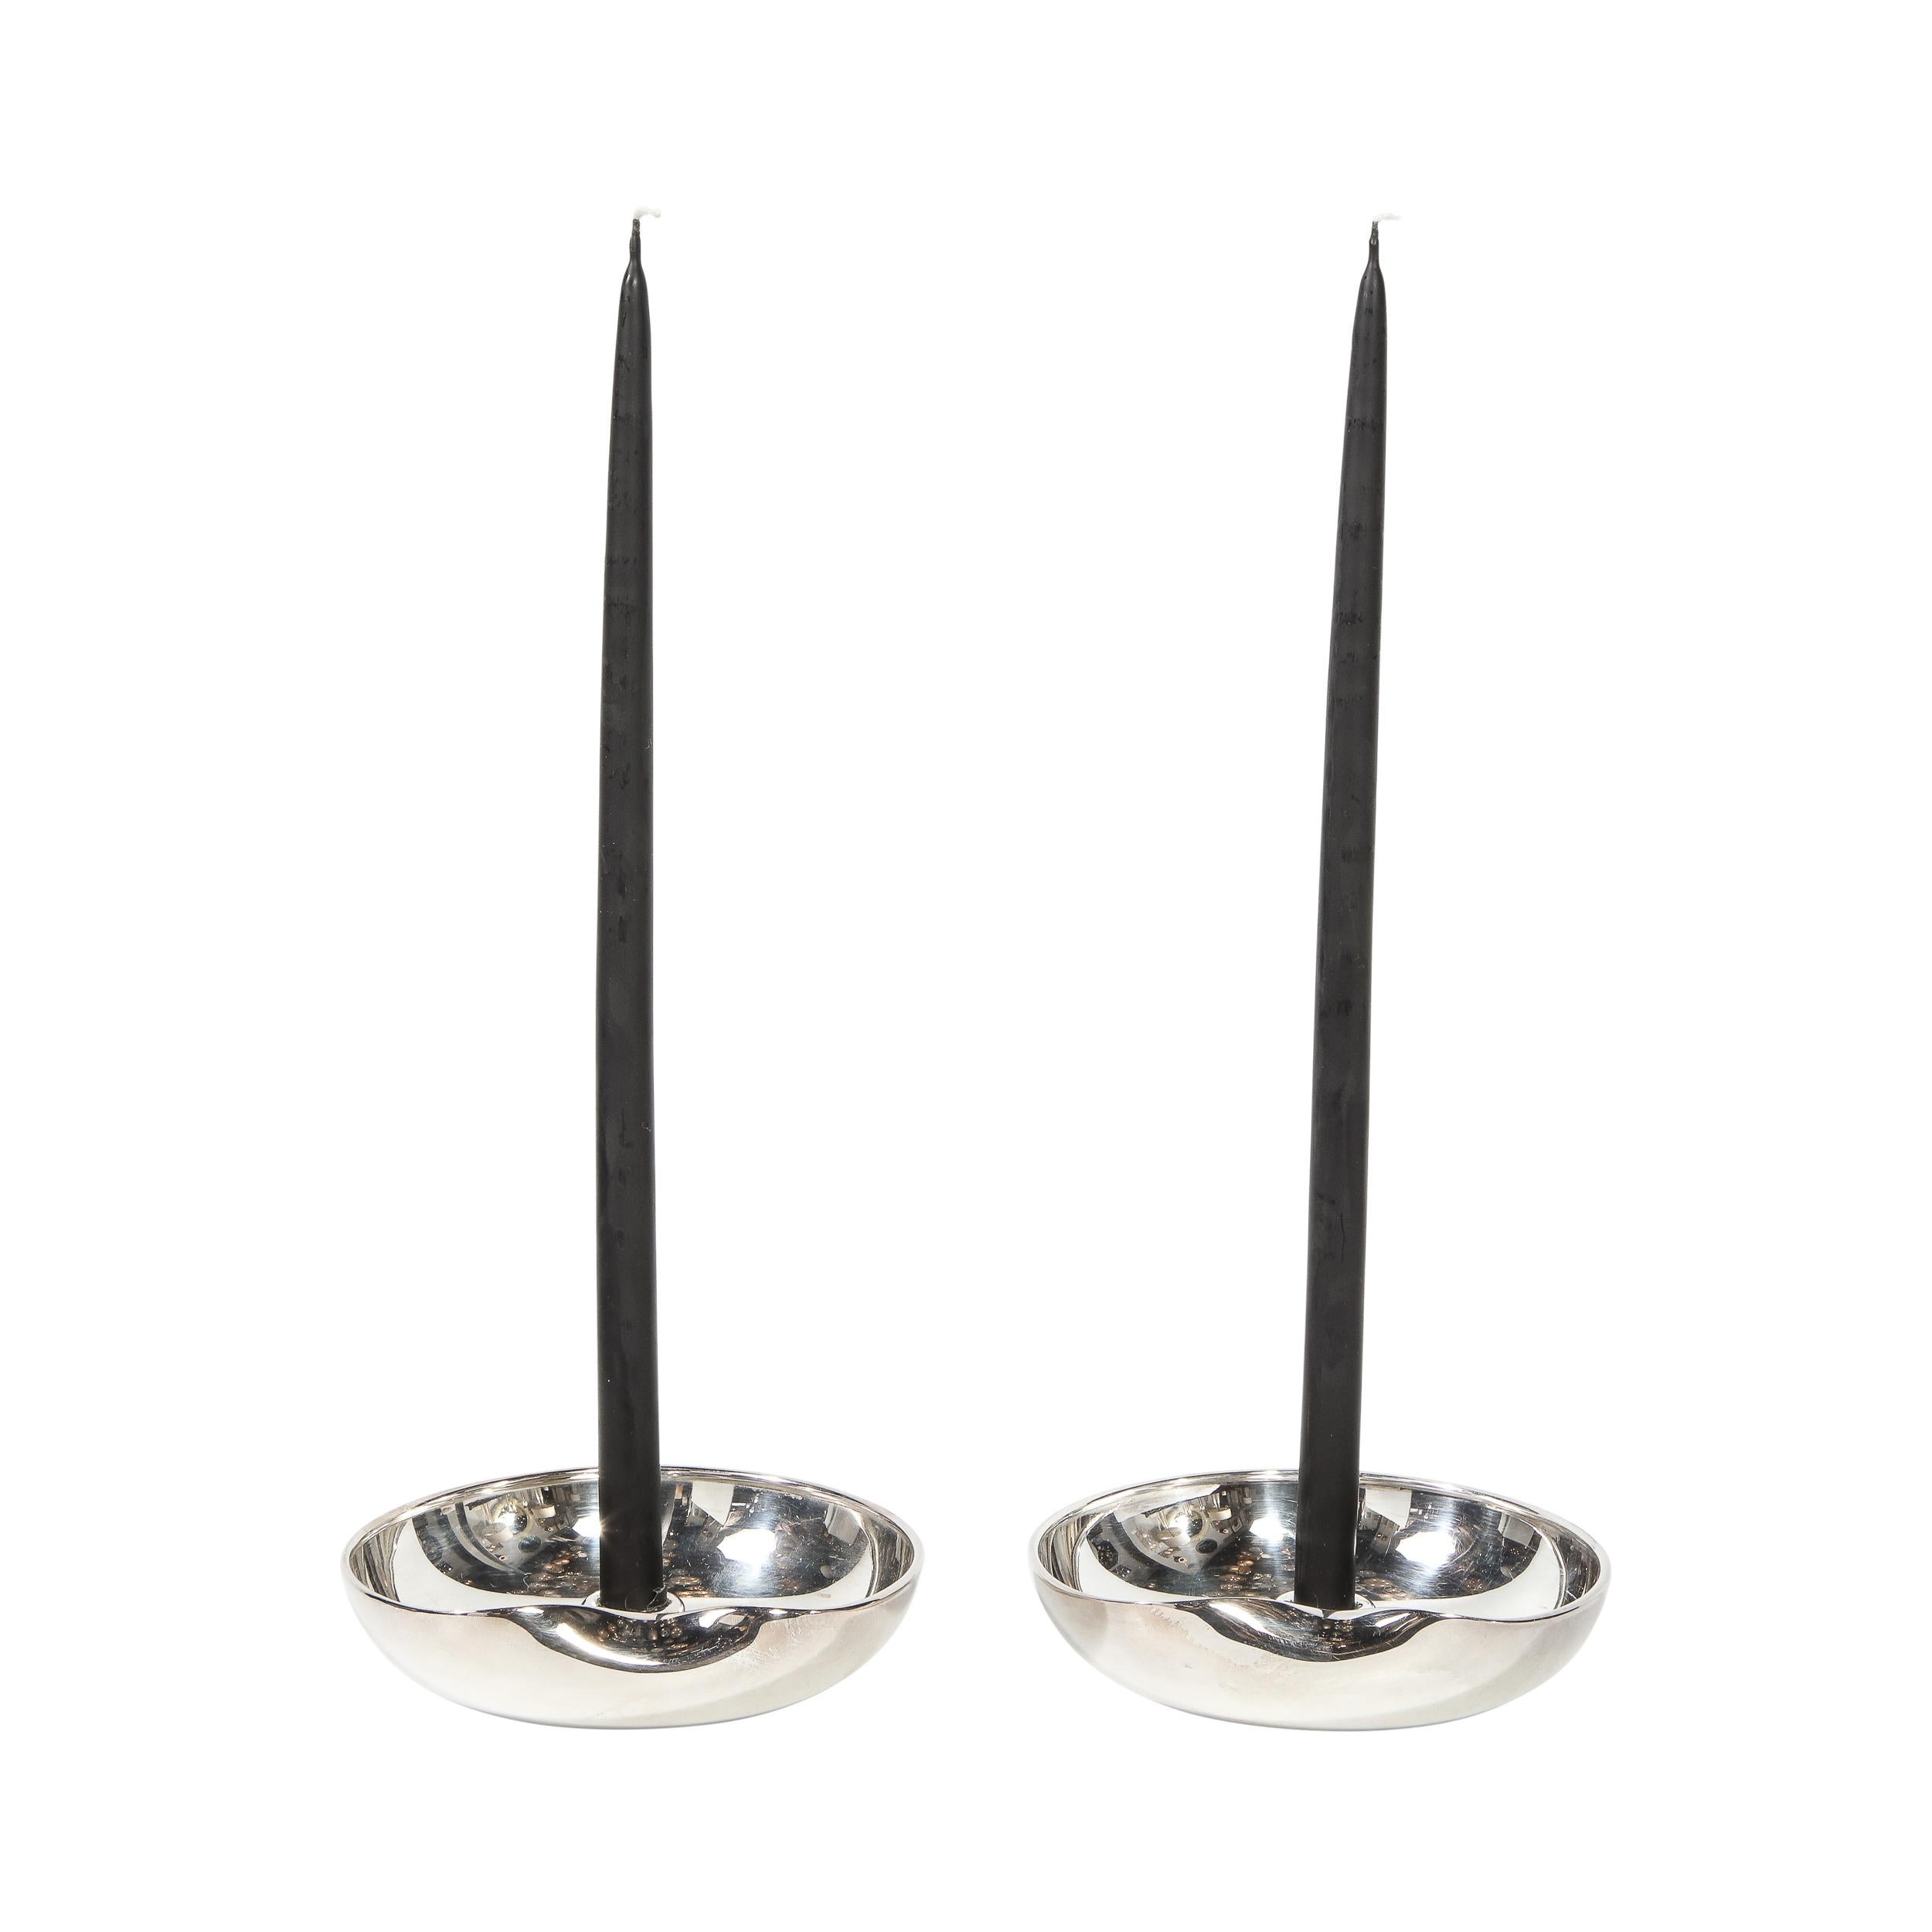 Pair of Modernist Sterling Candle Holders by Elsa Peretti for Tiffany & Co. In Excellent Condition For Sale In New York, NY